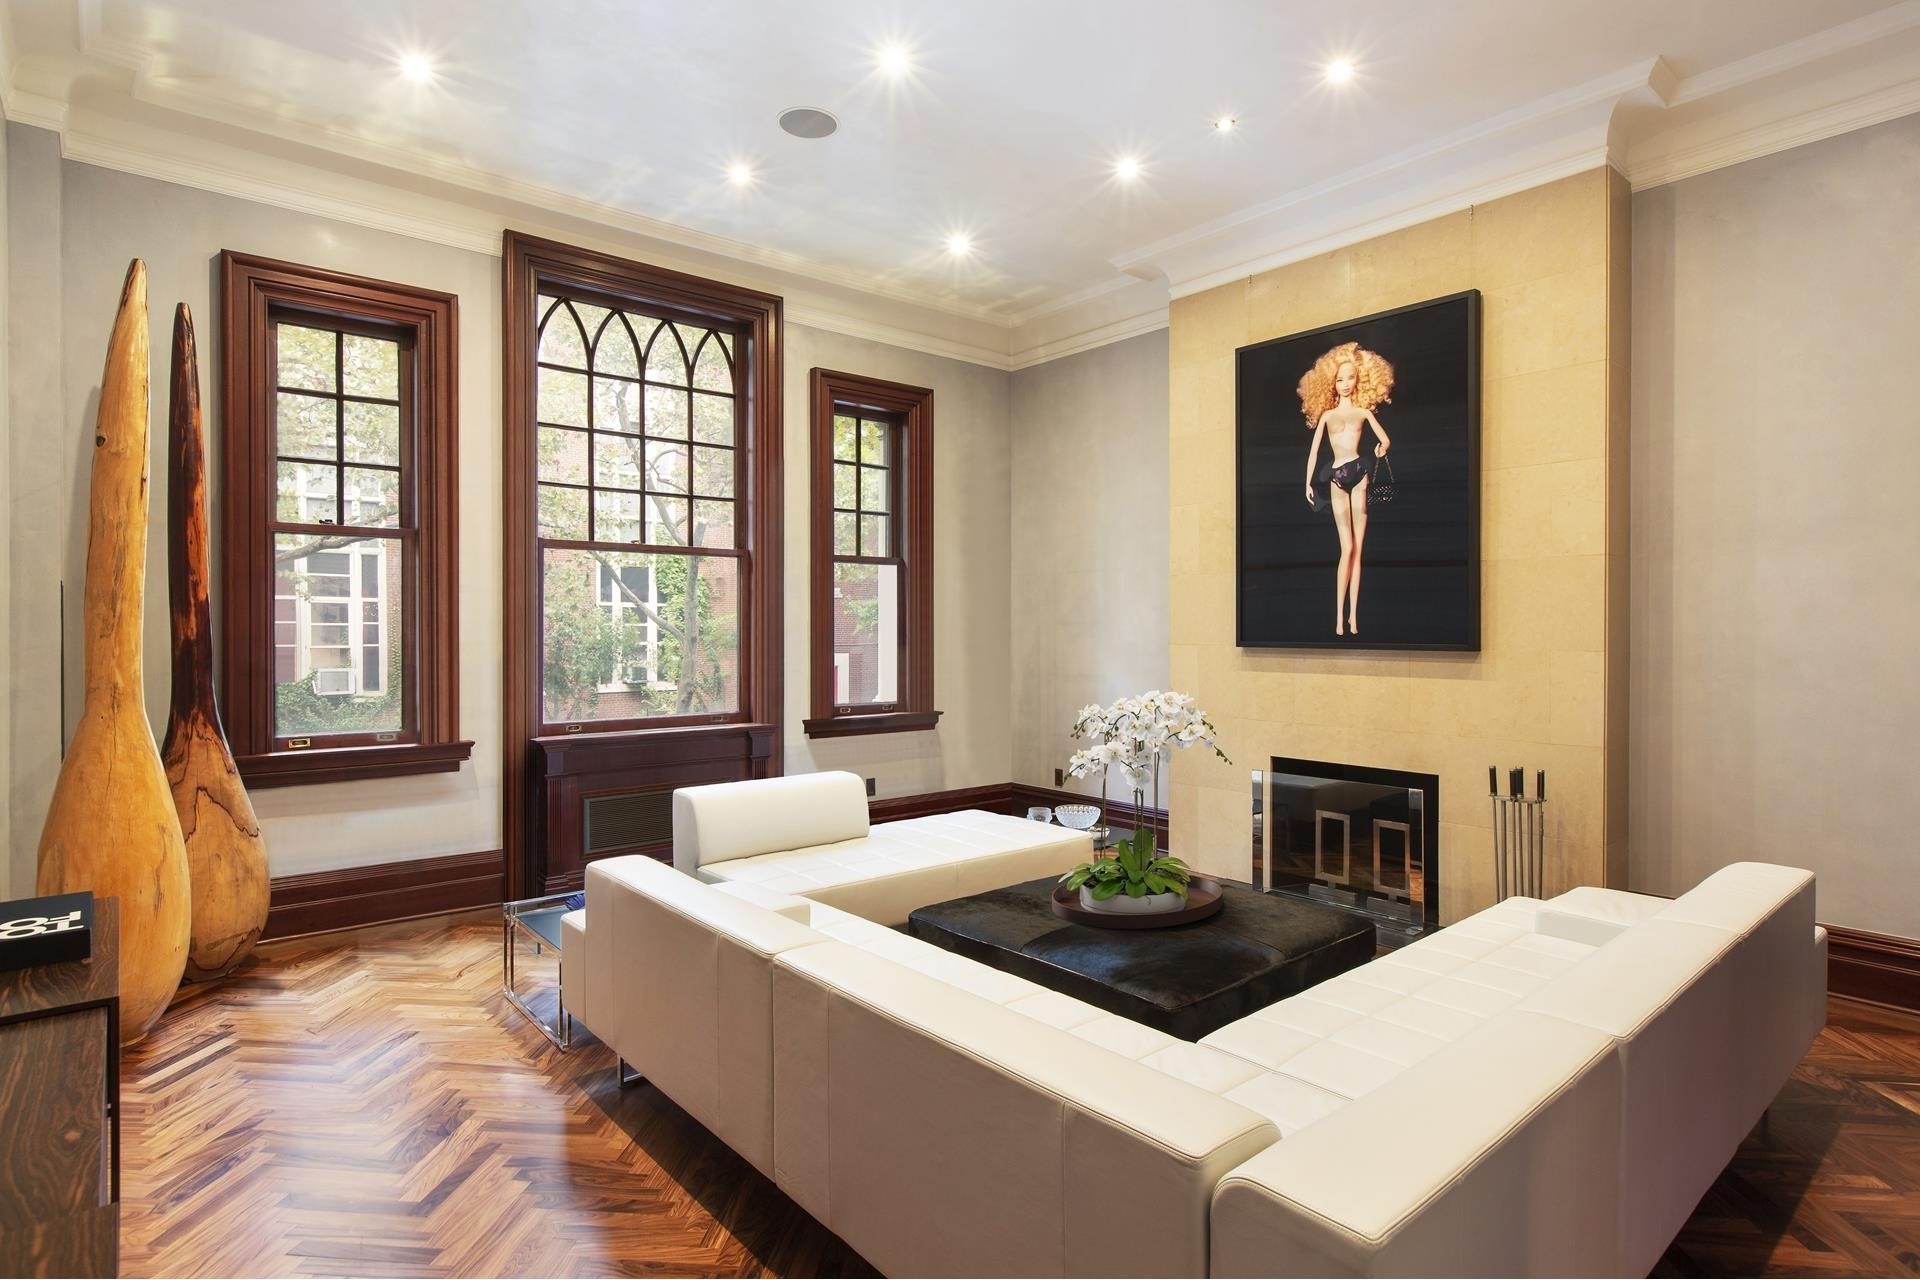 6. Single Family Townhouse for Sale at 48 E 81ST ST, TOWNHOUSE Upper East Side, New York, NY 10028